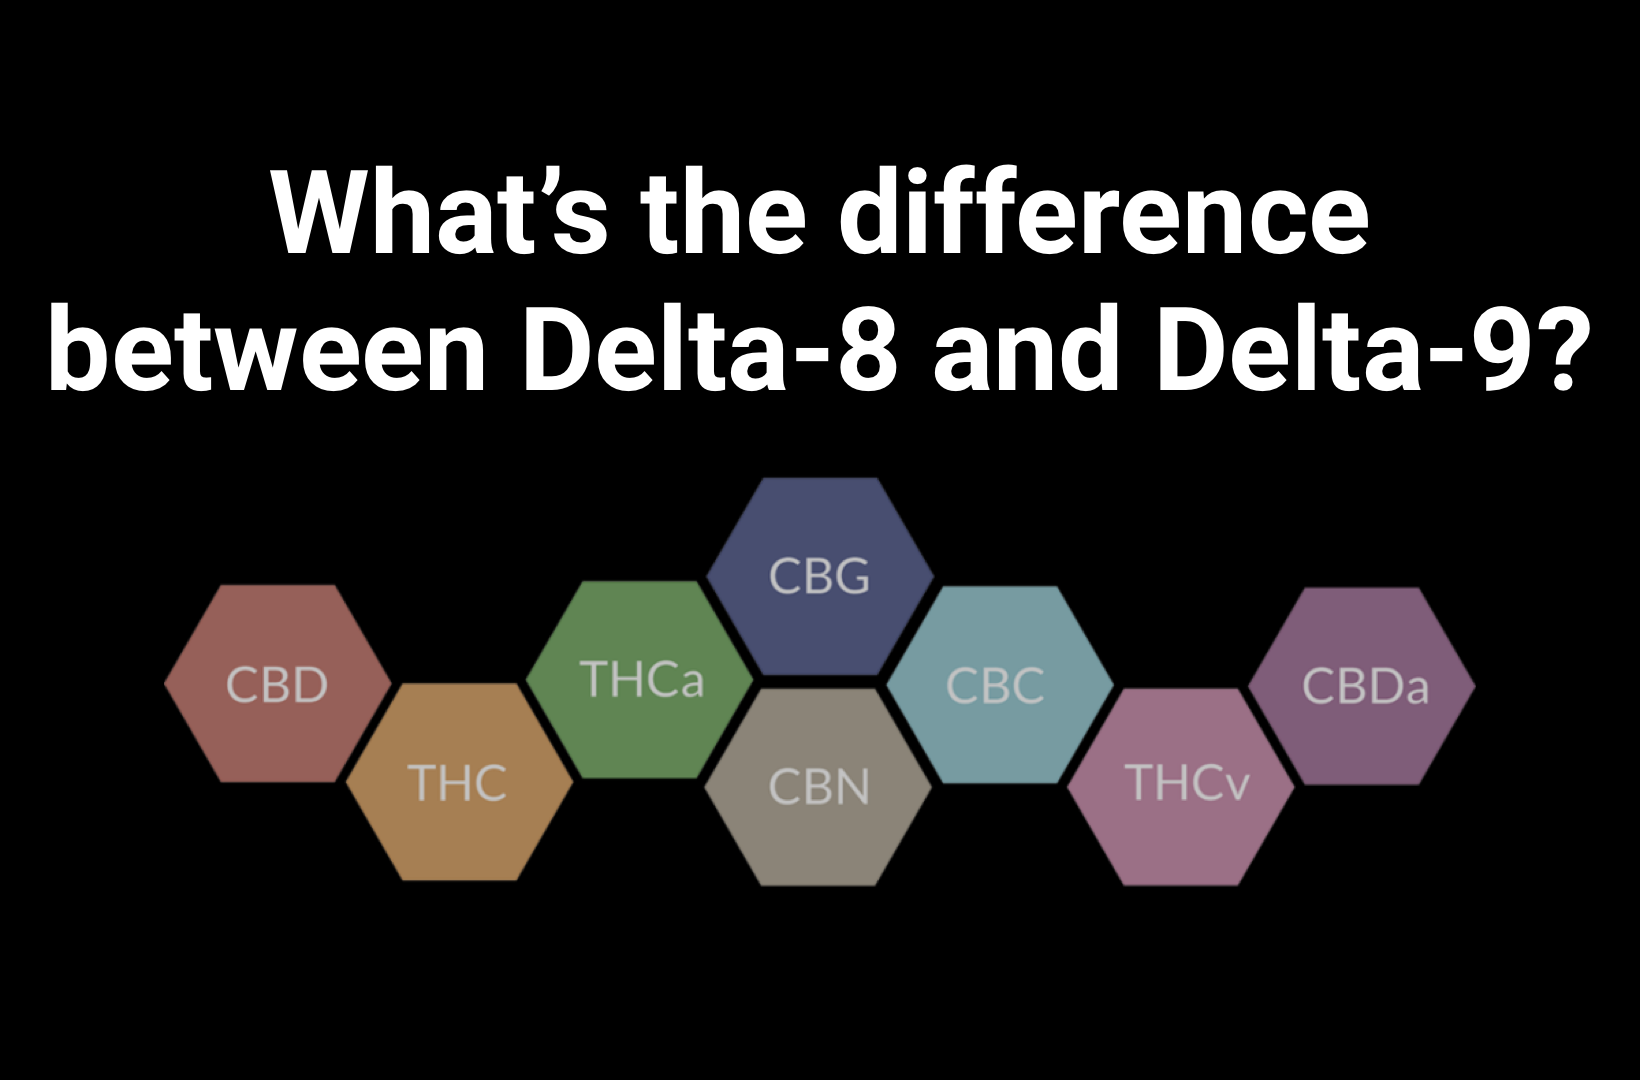 Difference between delta-8 and delta-9